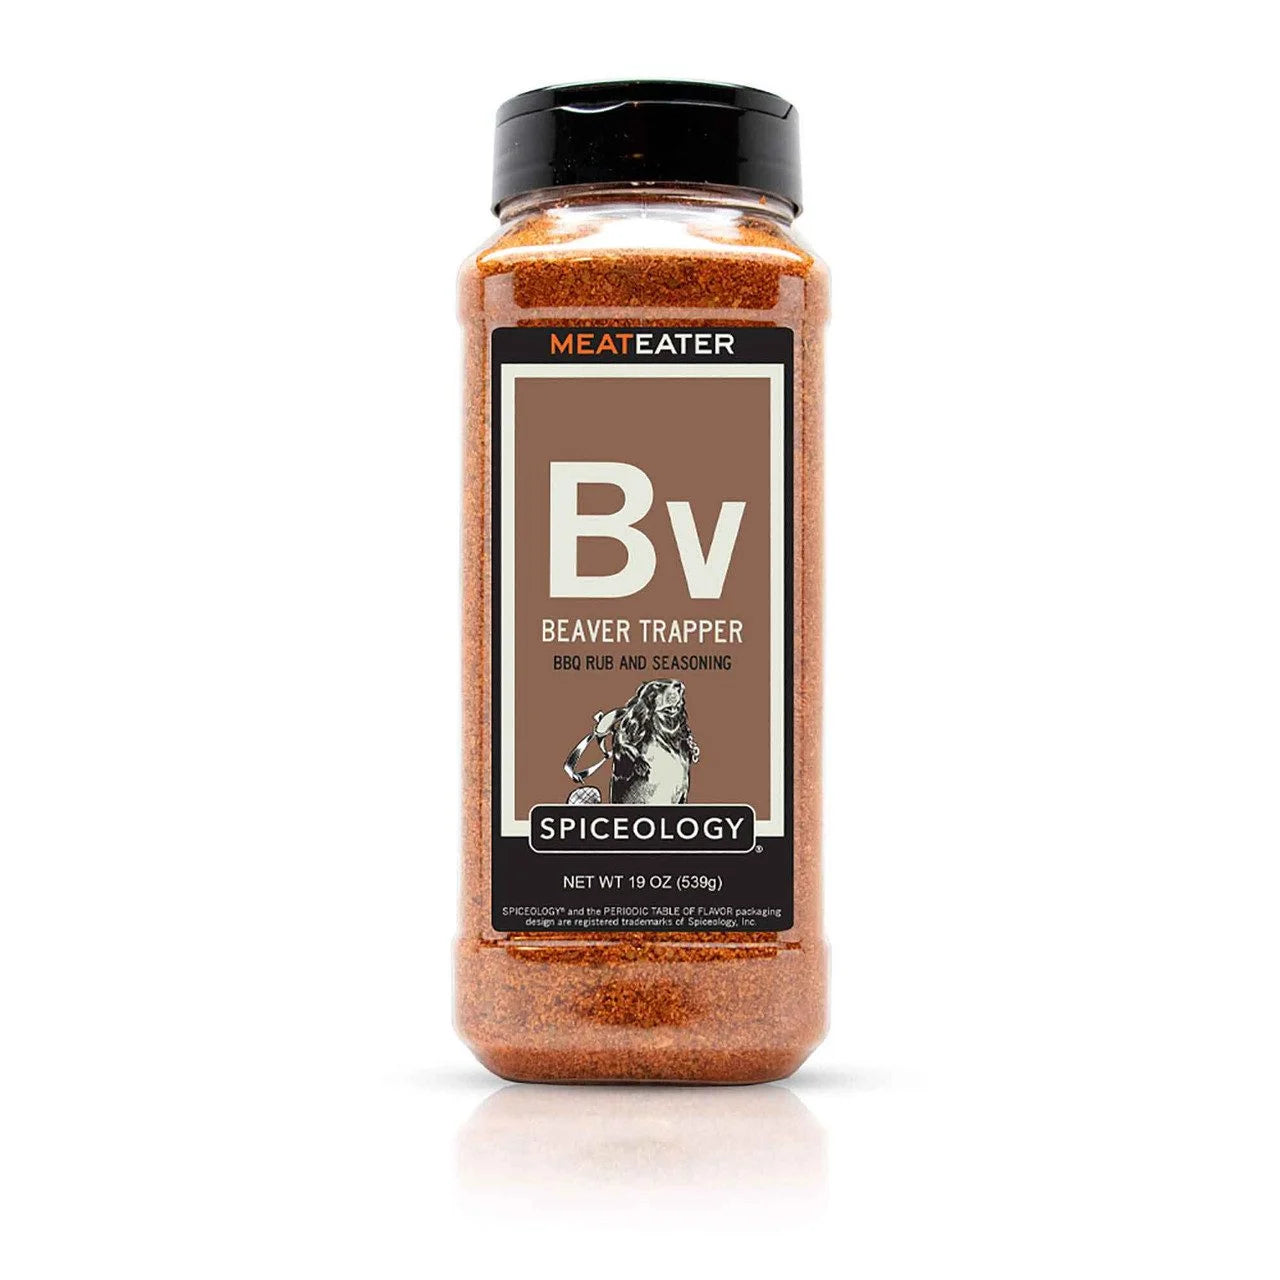 Spiceology MeatEater Beaver Trapper Pork and Beef Seasoning